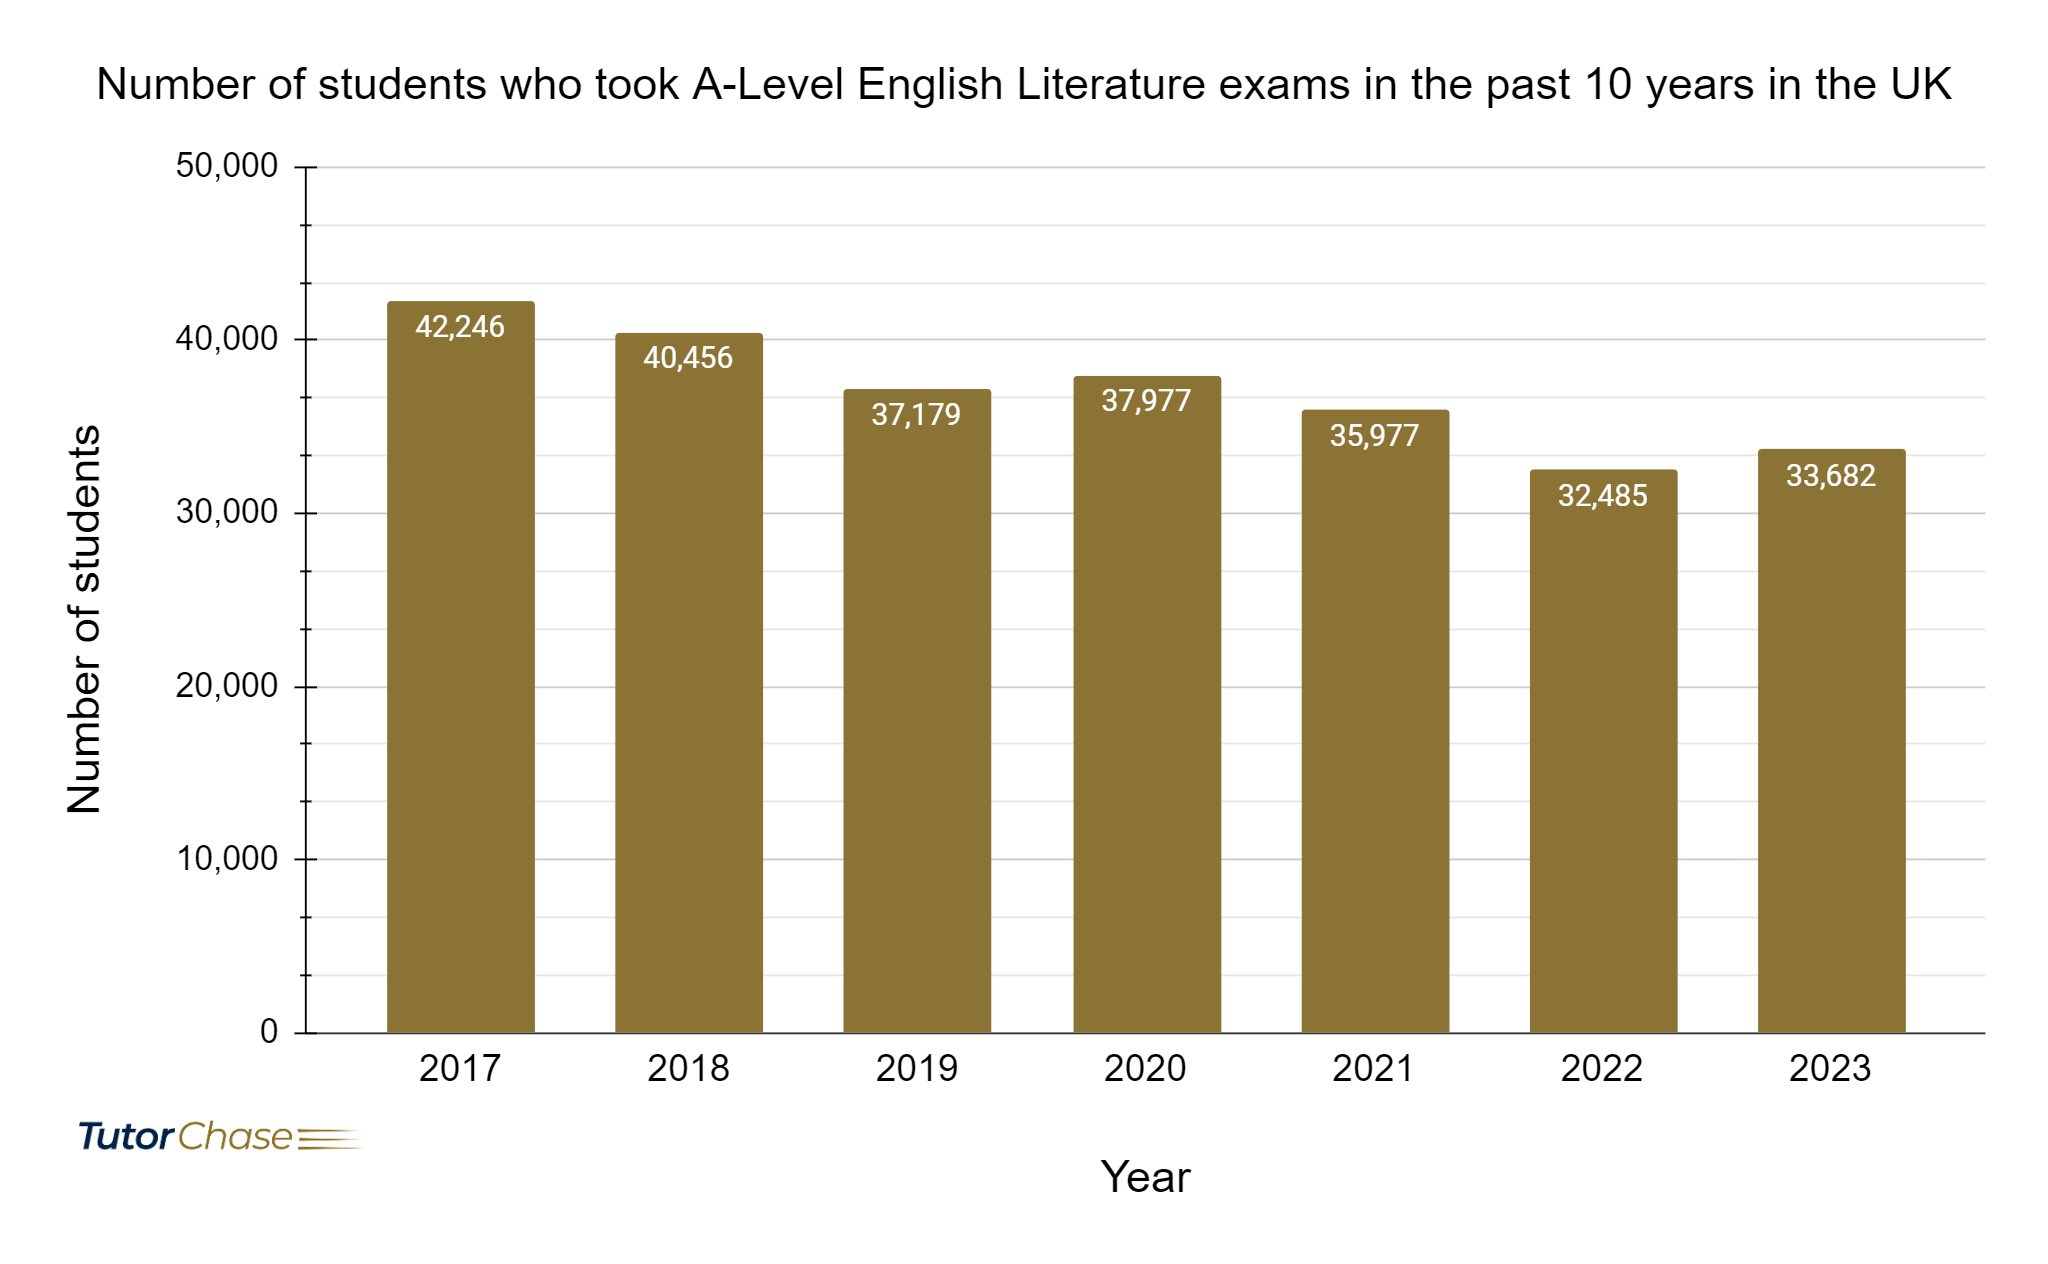 Number of students who took A-Level English Literature exams in the past 10 years